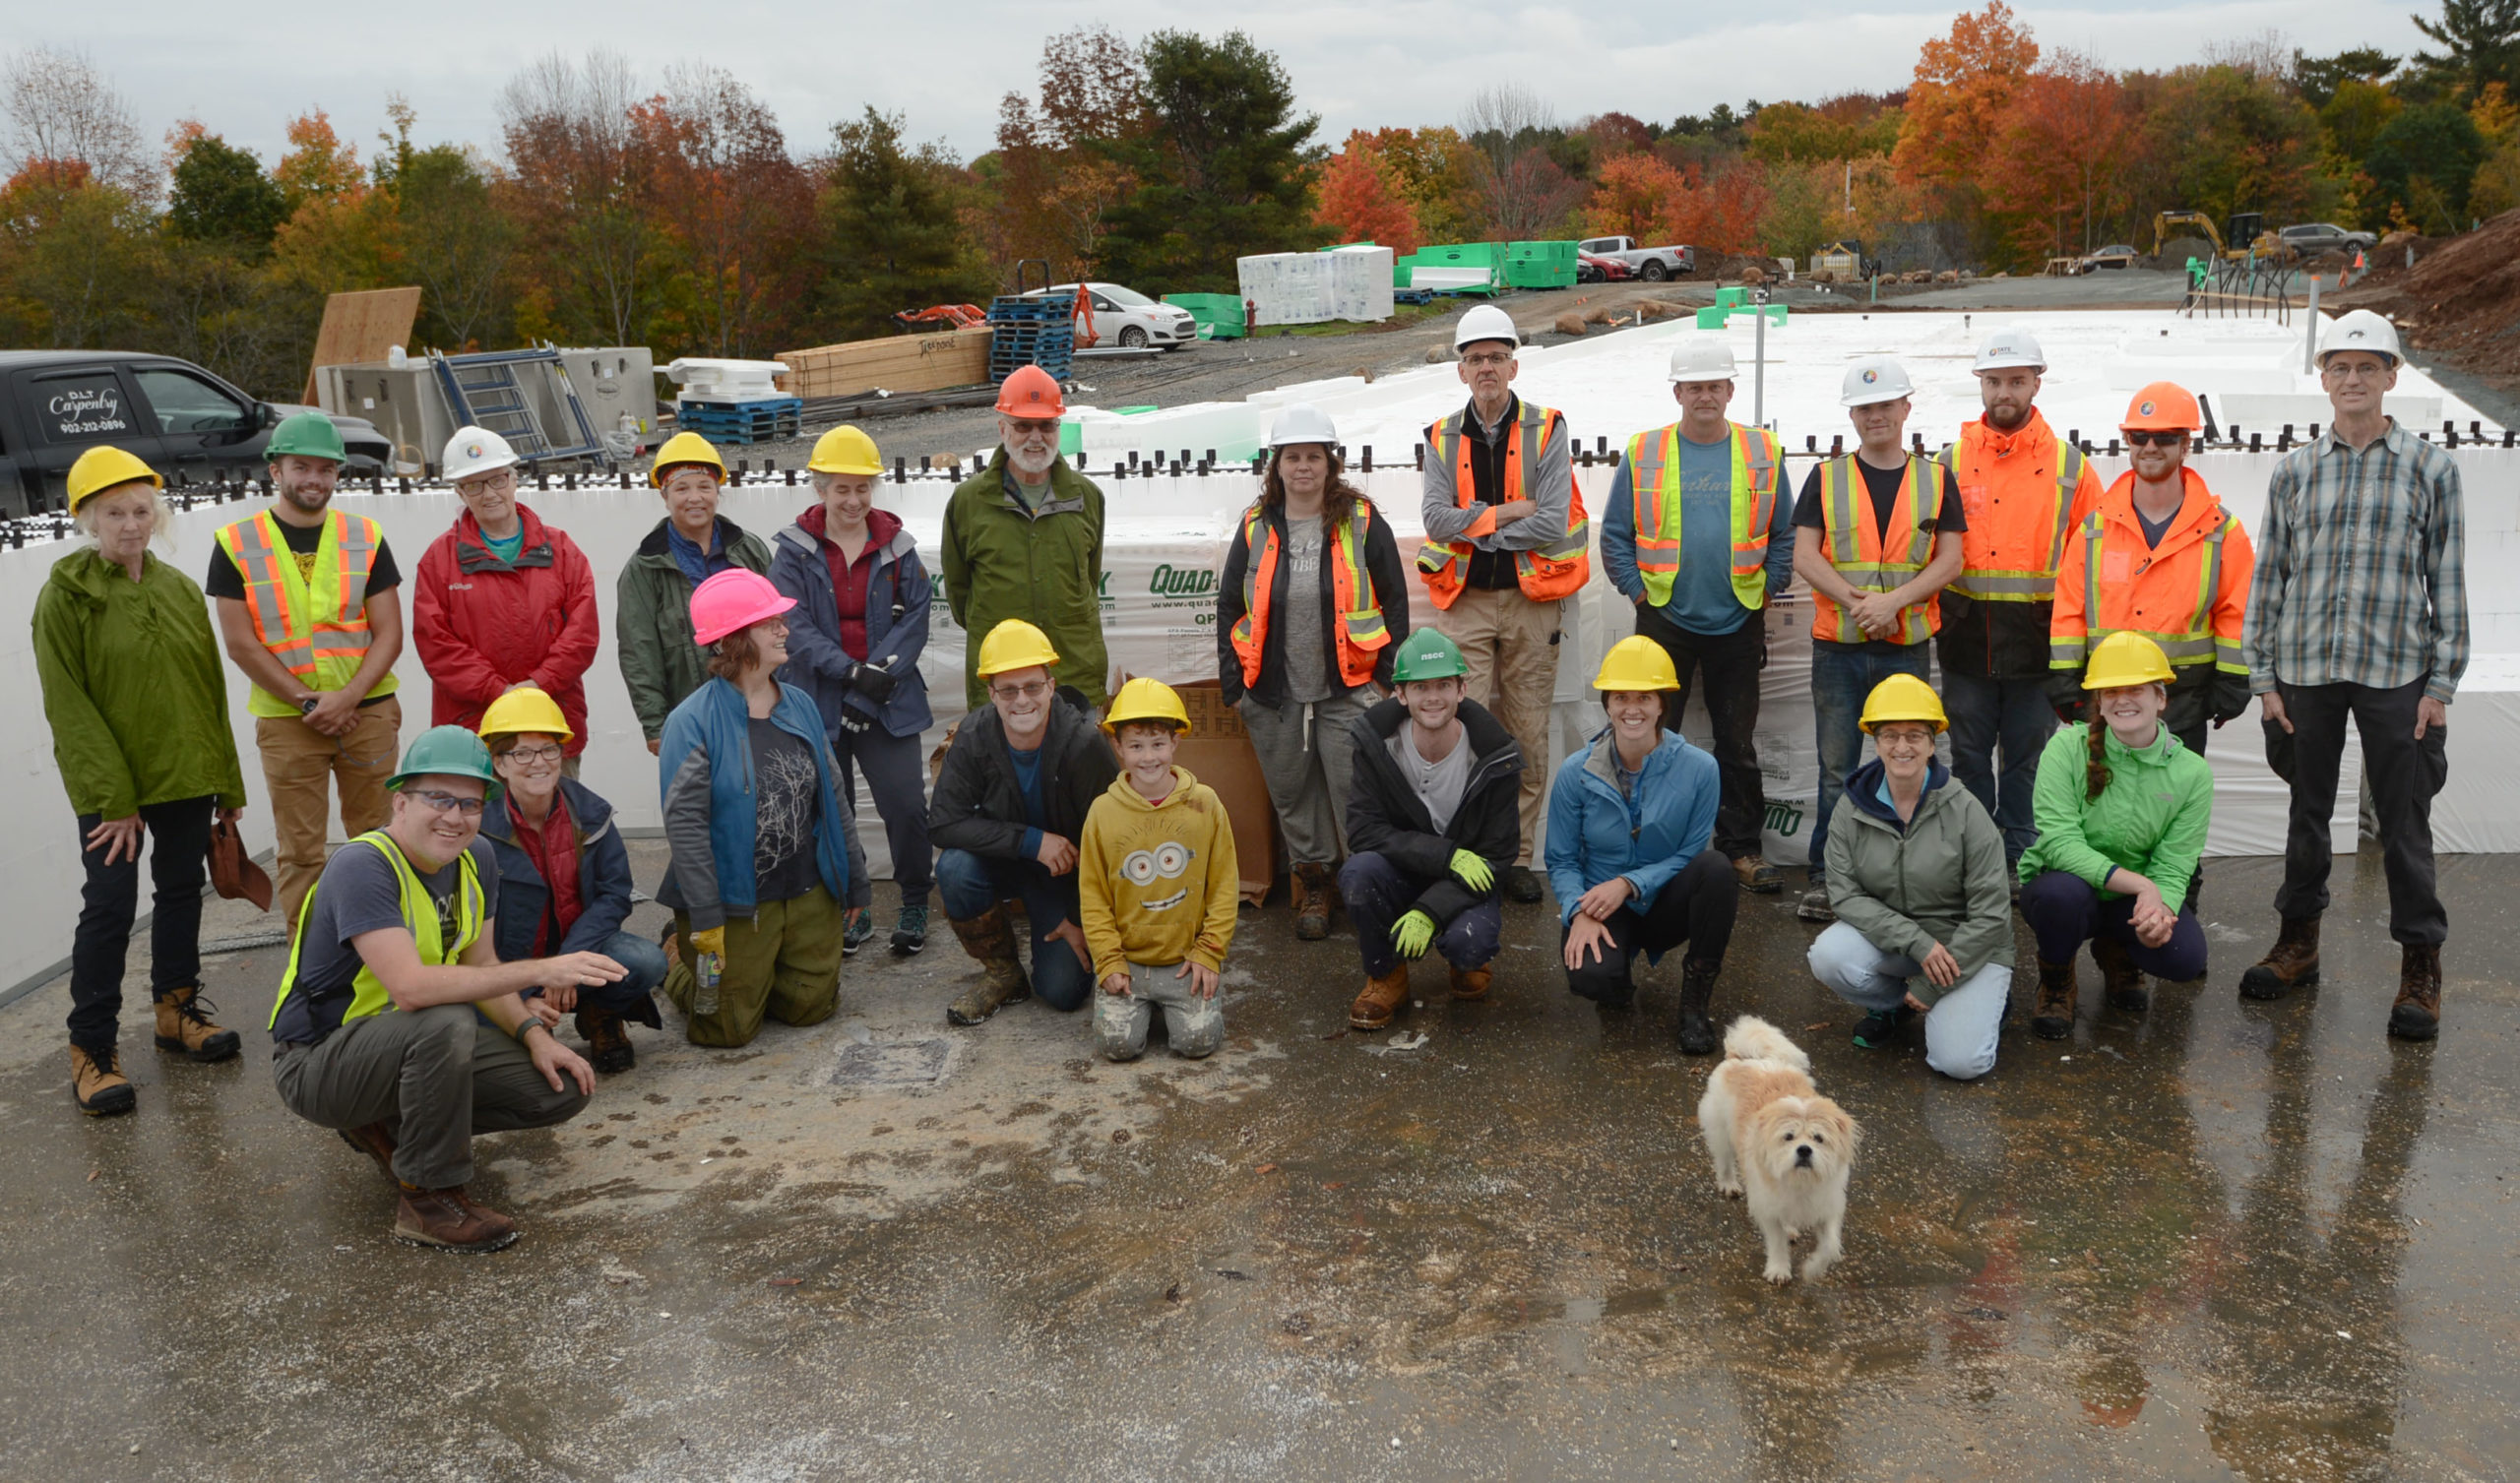 Treehouse Village members and professionals from Tate Engineering wearing hardhats pose for a photo after a day of assembling the styrofoam forms for the insulated concrete form walls of their common house. A dog joined the photo op.